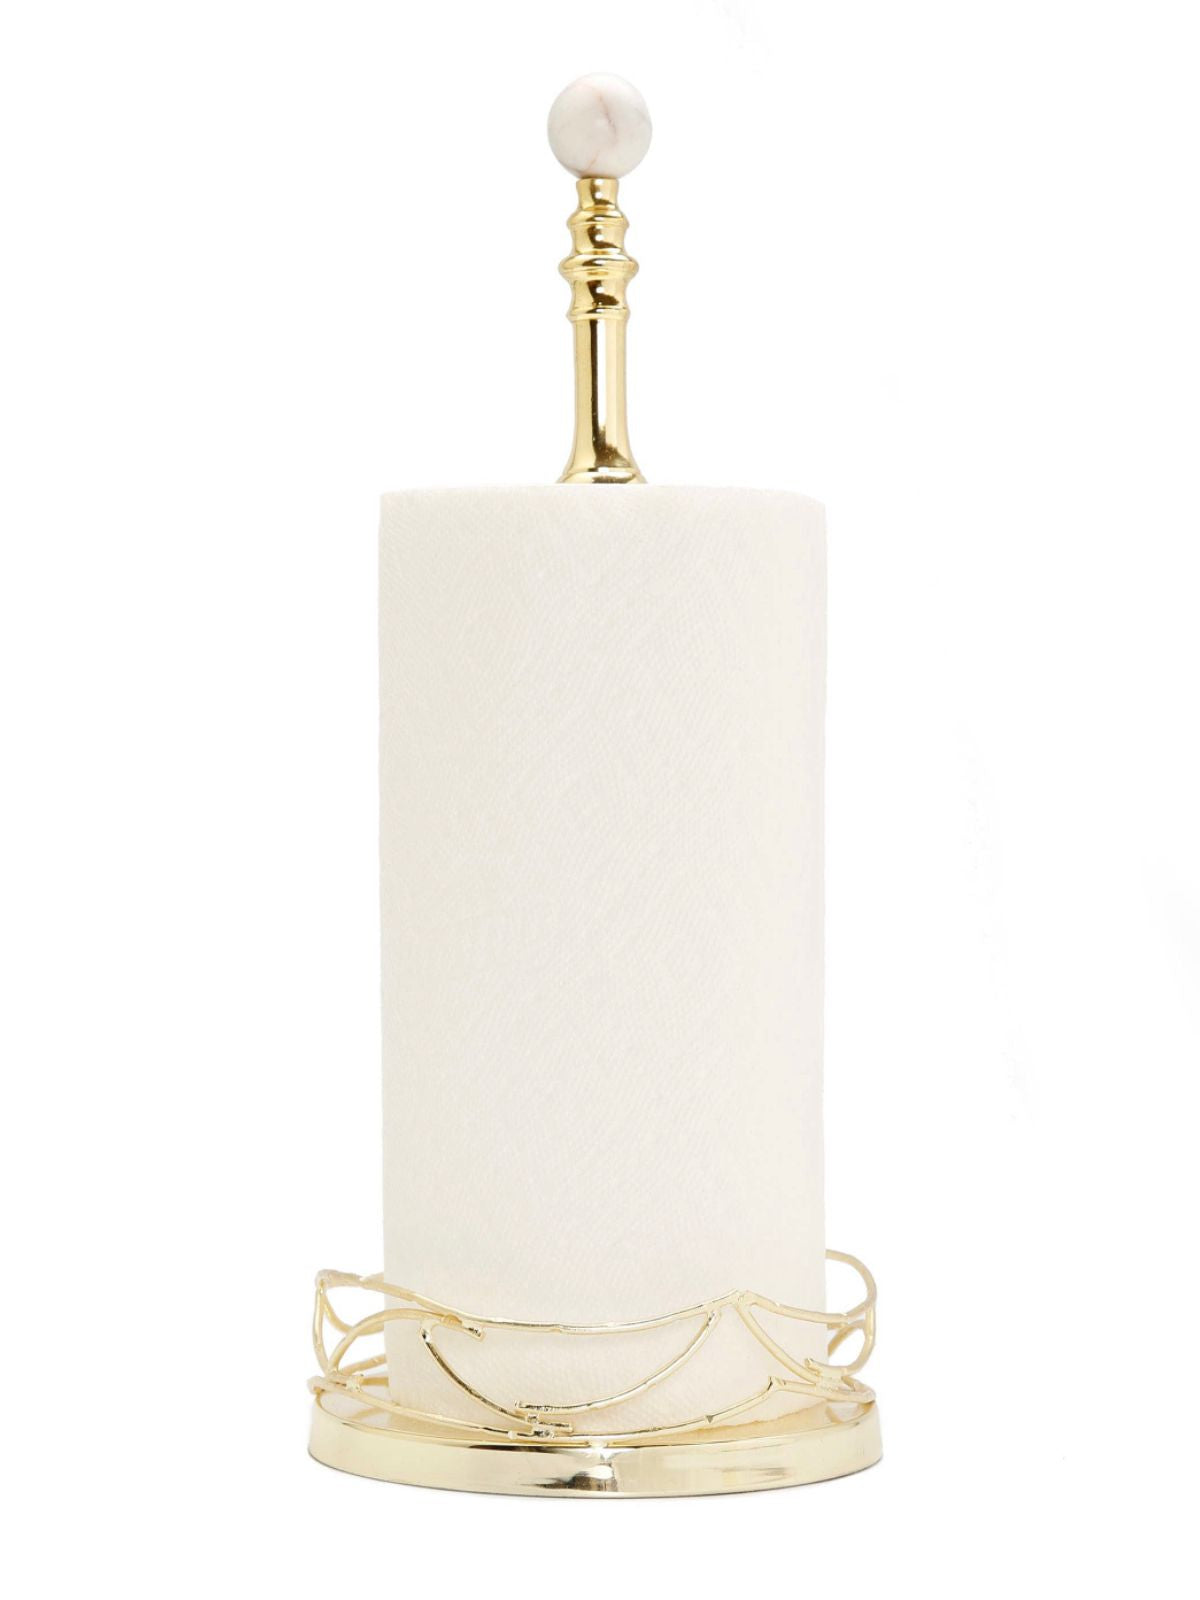 This stunning paper towel holder features a marble top and gold mesh design Sold by KYA Home Decor.